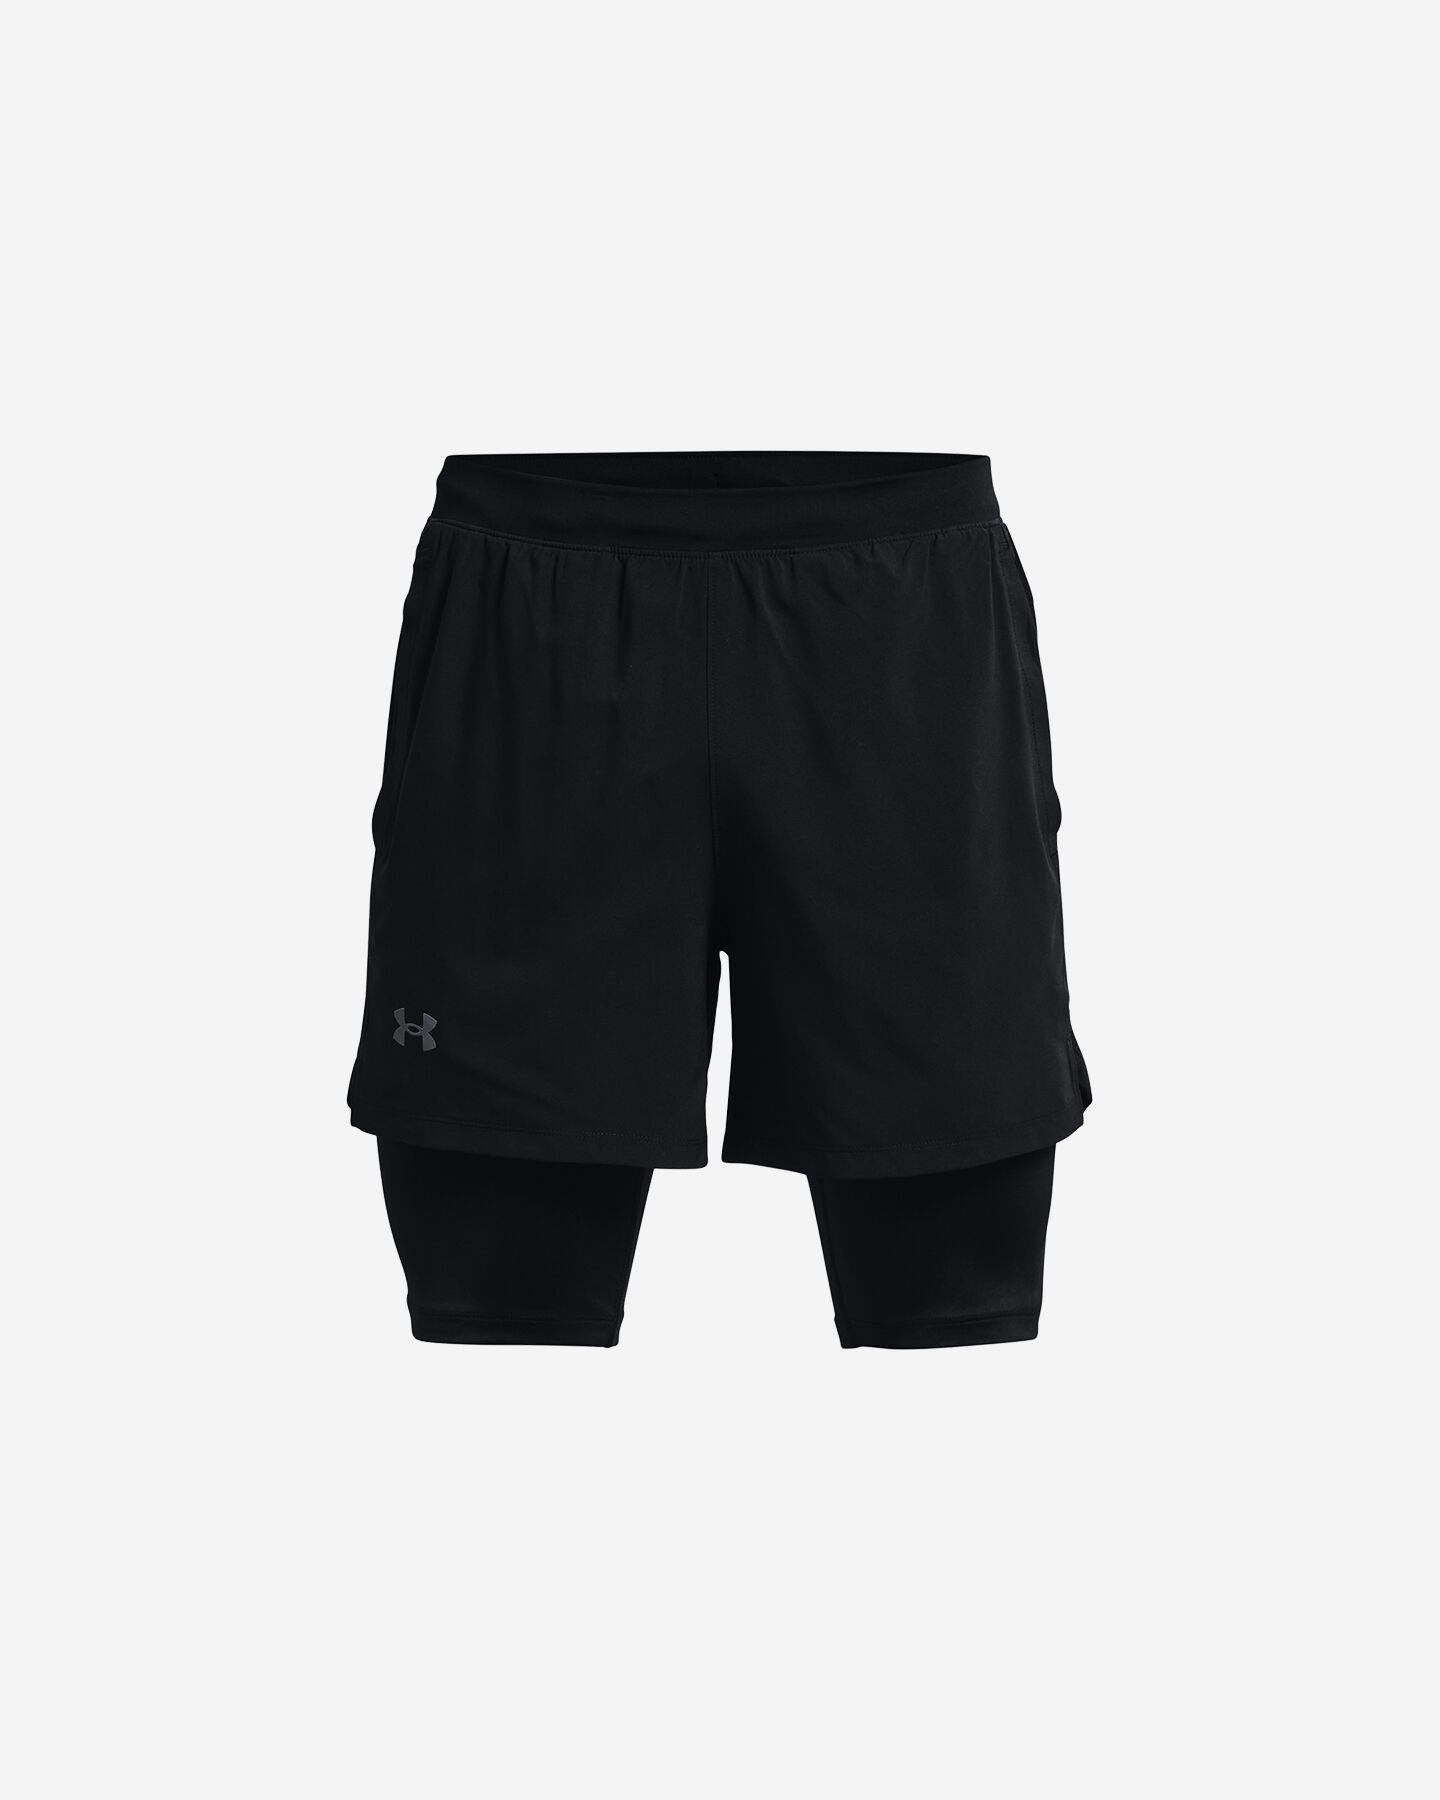  Pantalone training UNDER ARMOUR LAUNCH 5" 2N1 M S5390768|0001|SM scatto 0